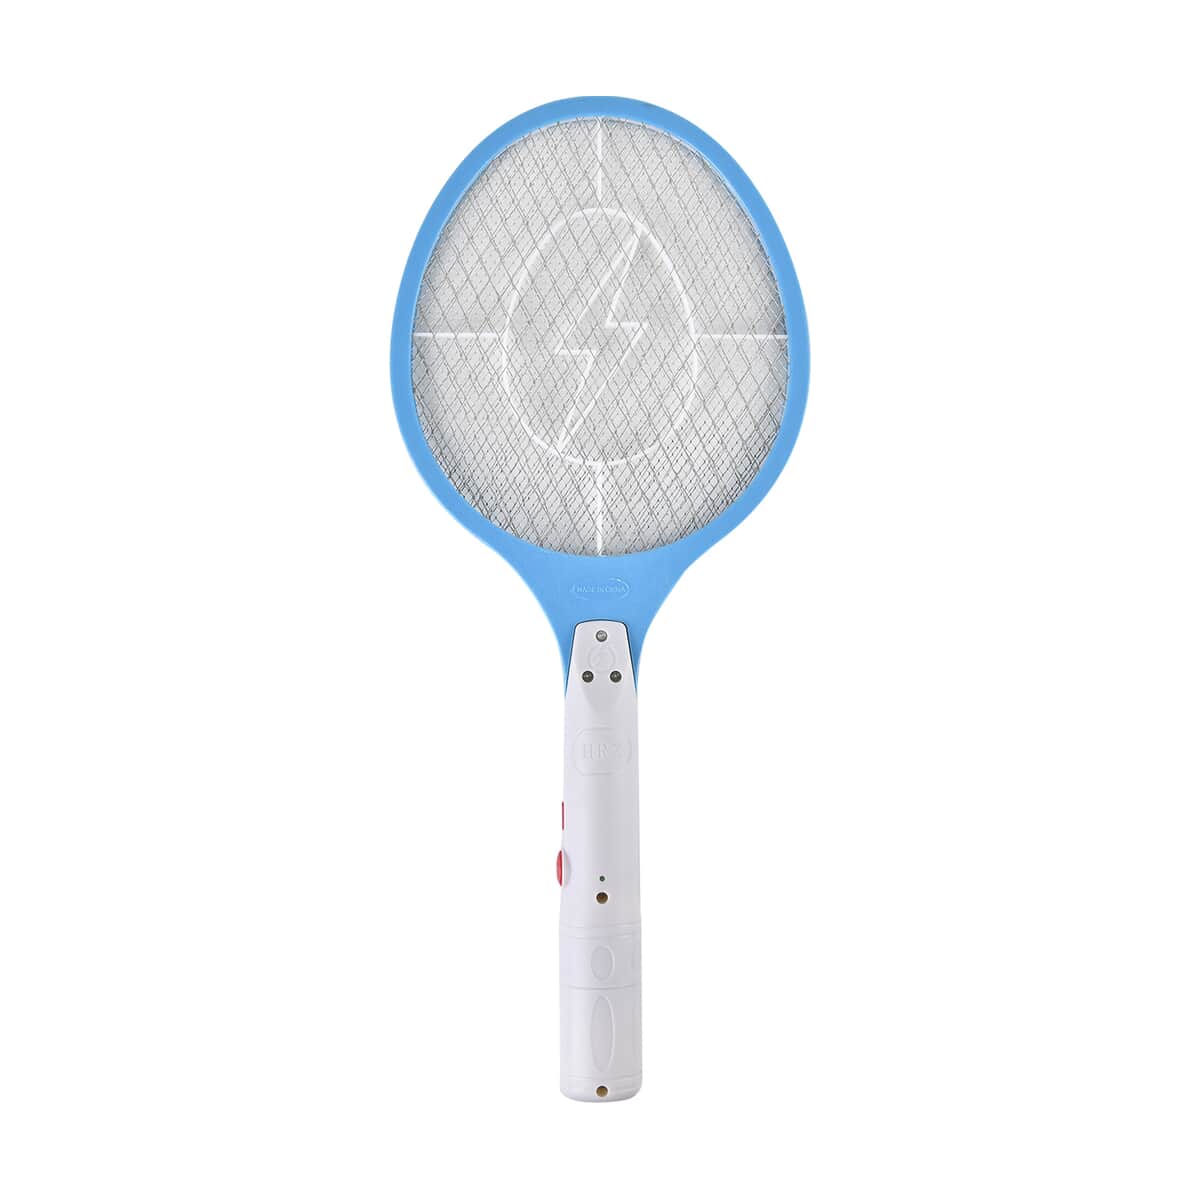 Rechargeable Handheld Zapper Mosquito Swatter - Blue (Powered by USB Cable) (19.6") image number 1